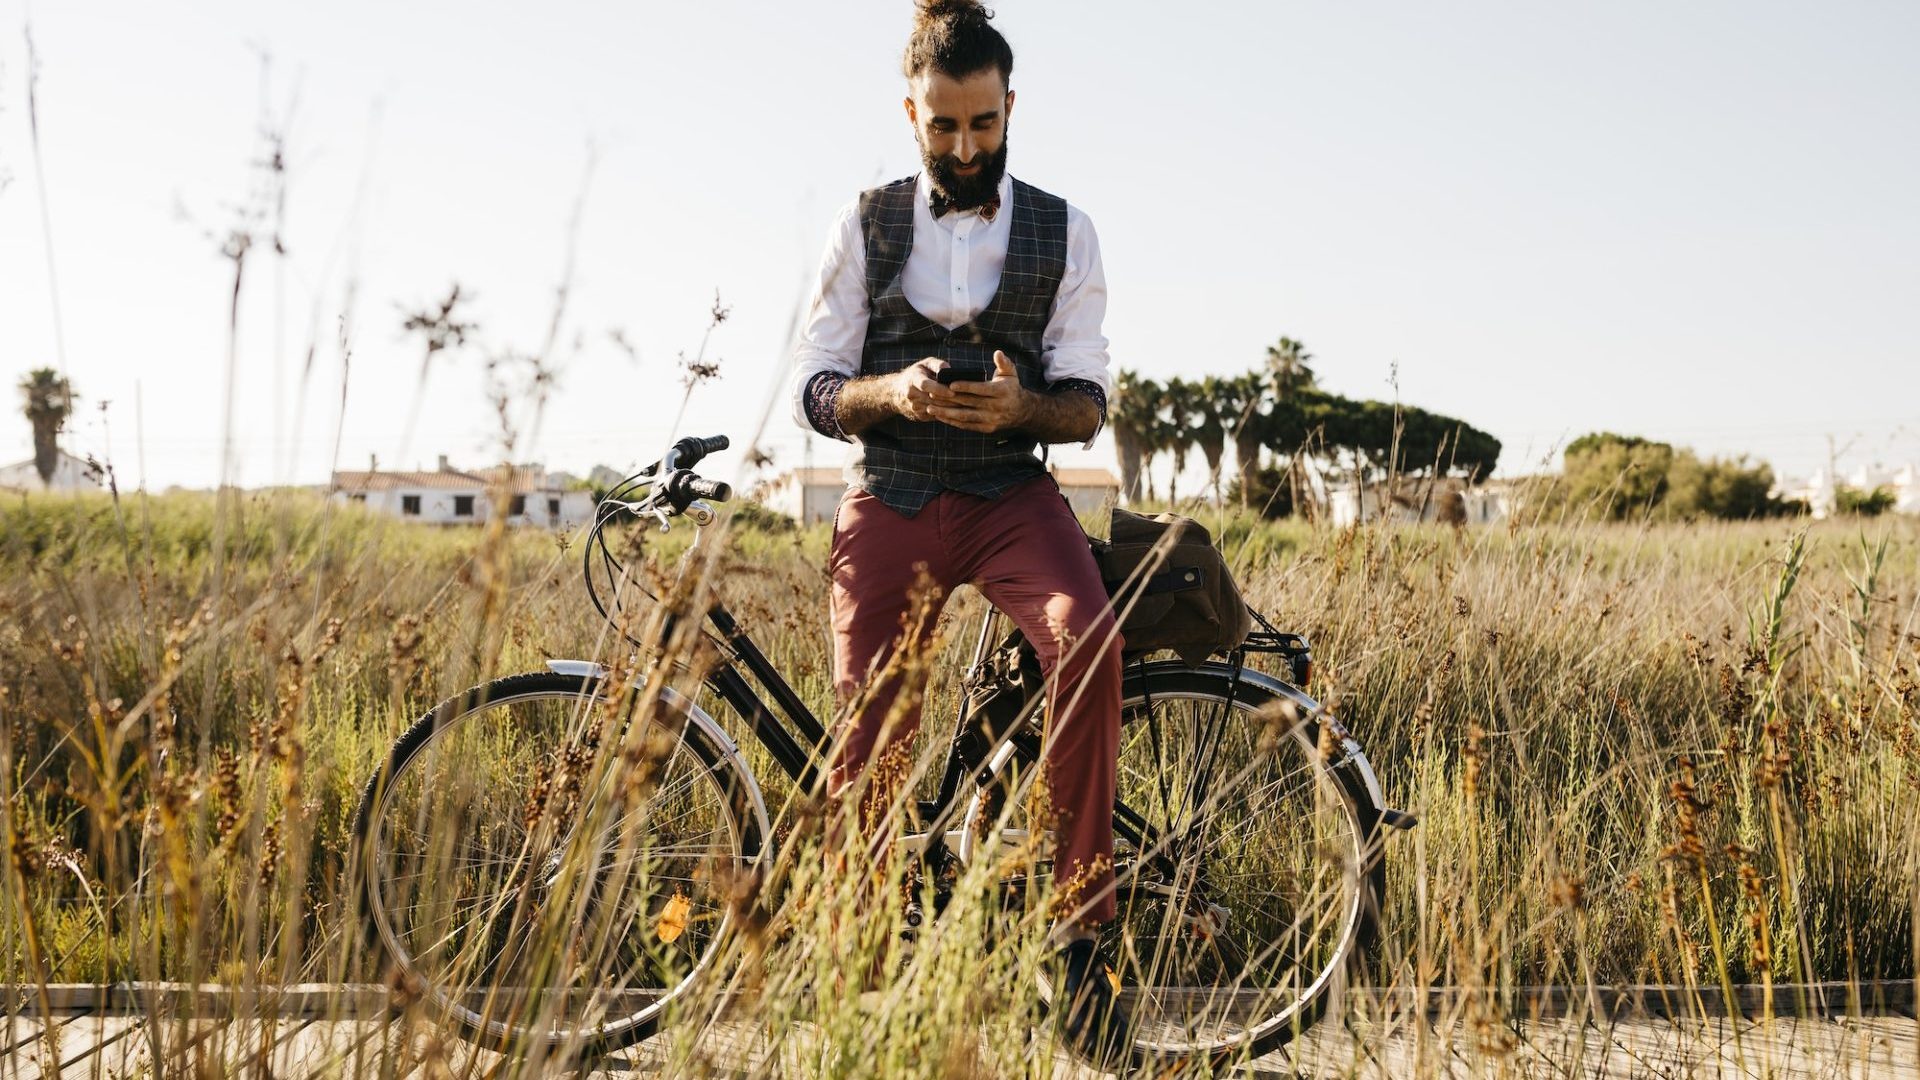 Well dressed man with his bike on a wooden walkway in the countryside using cell phone